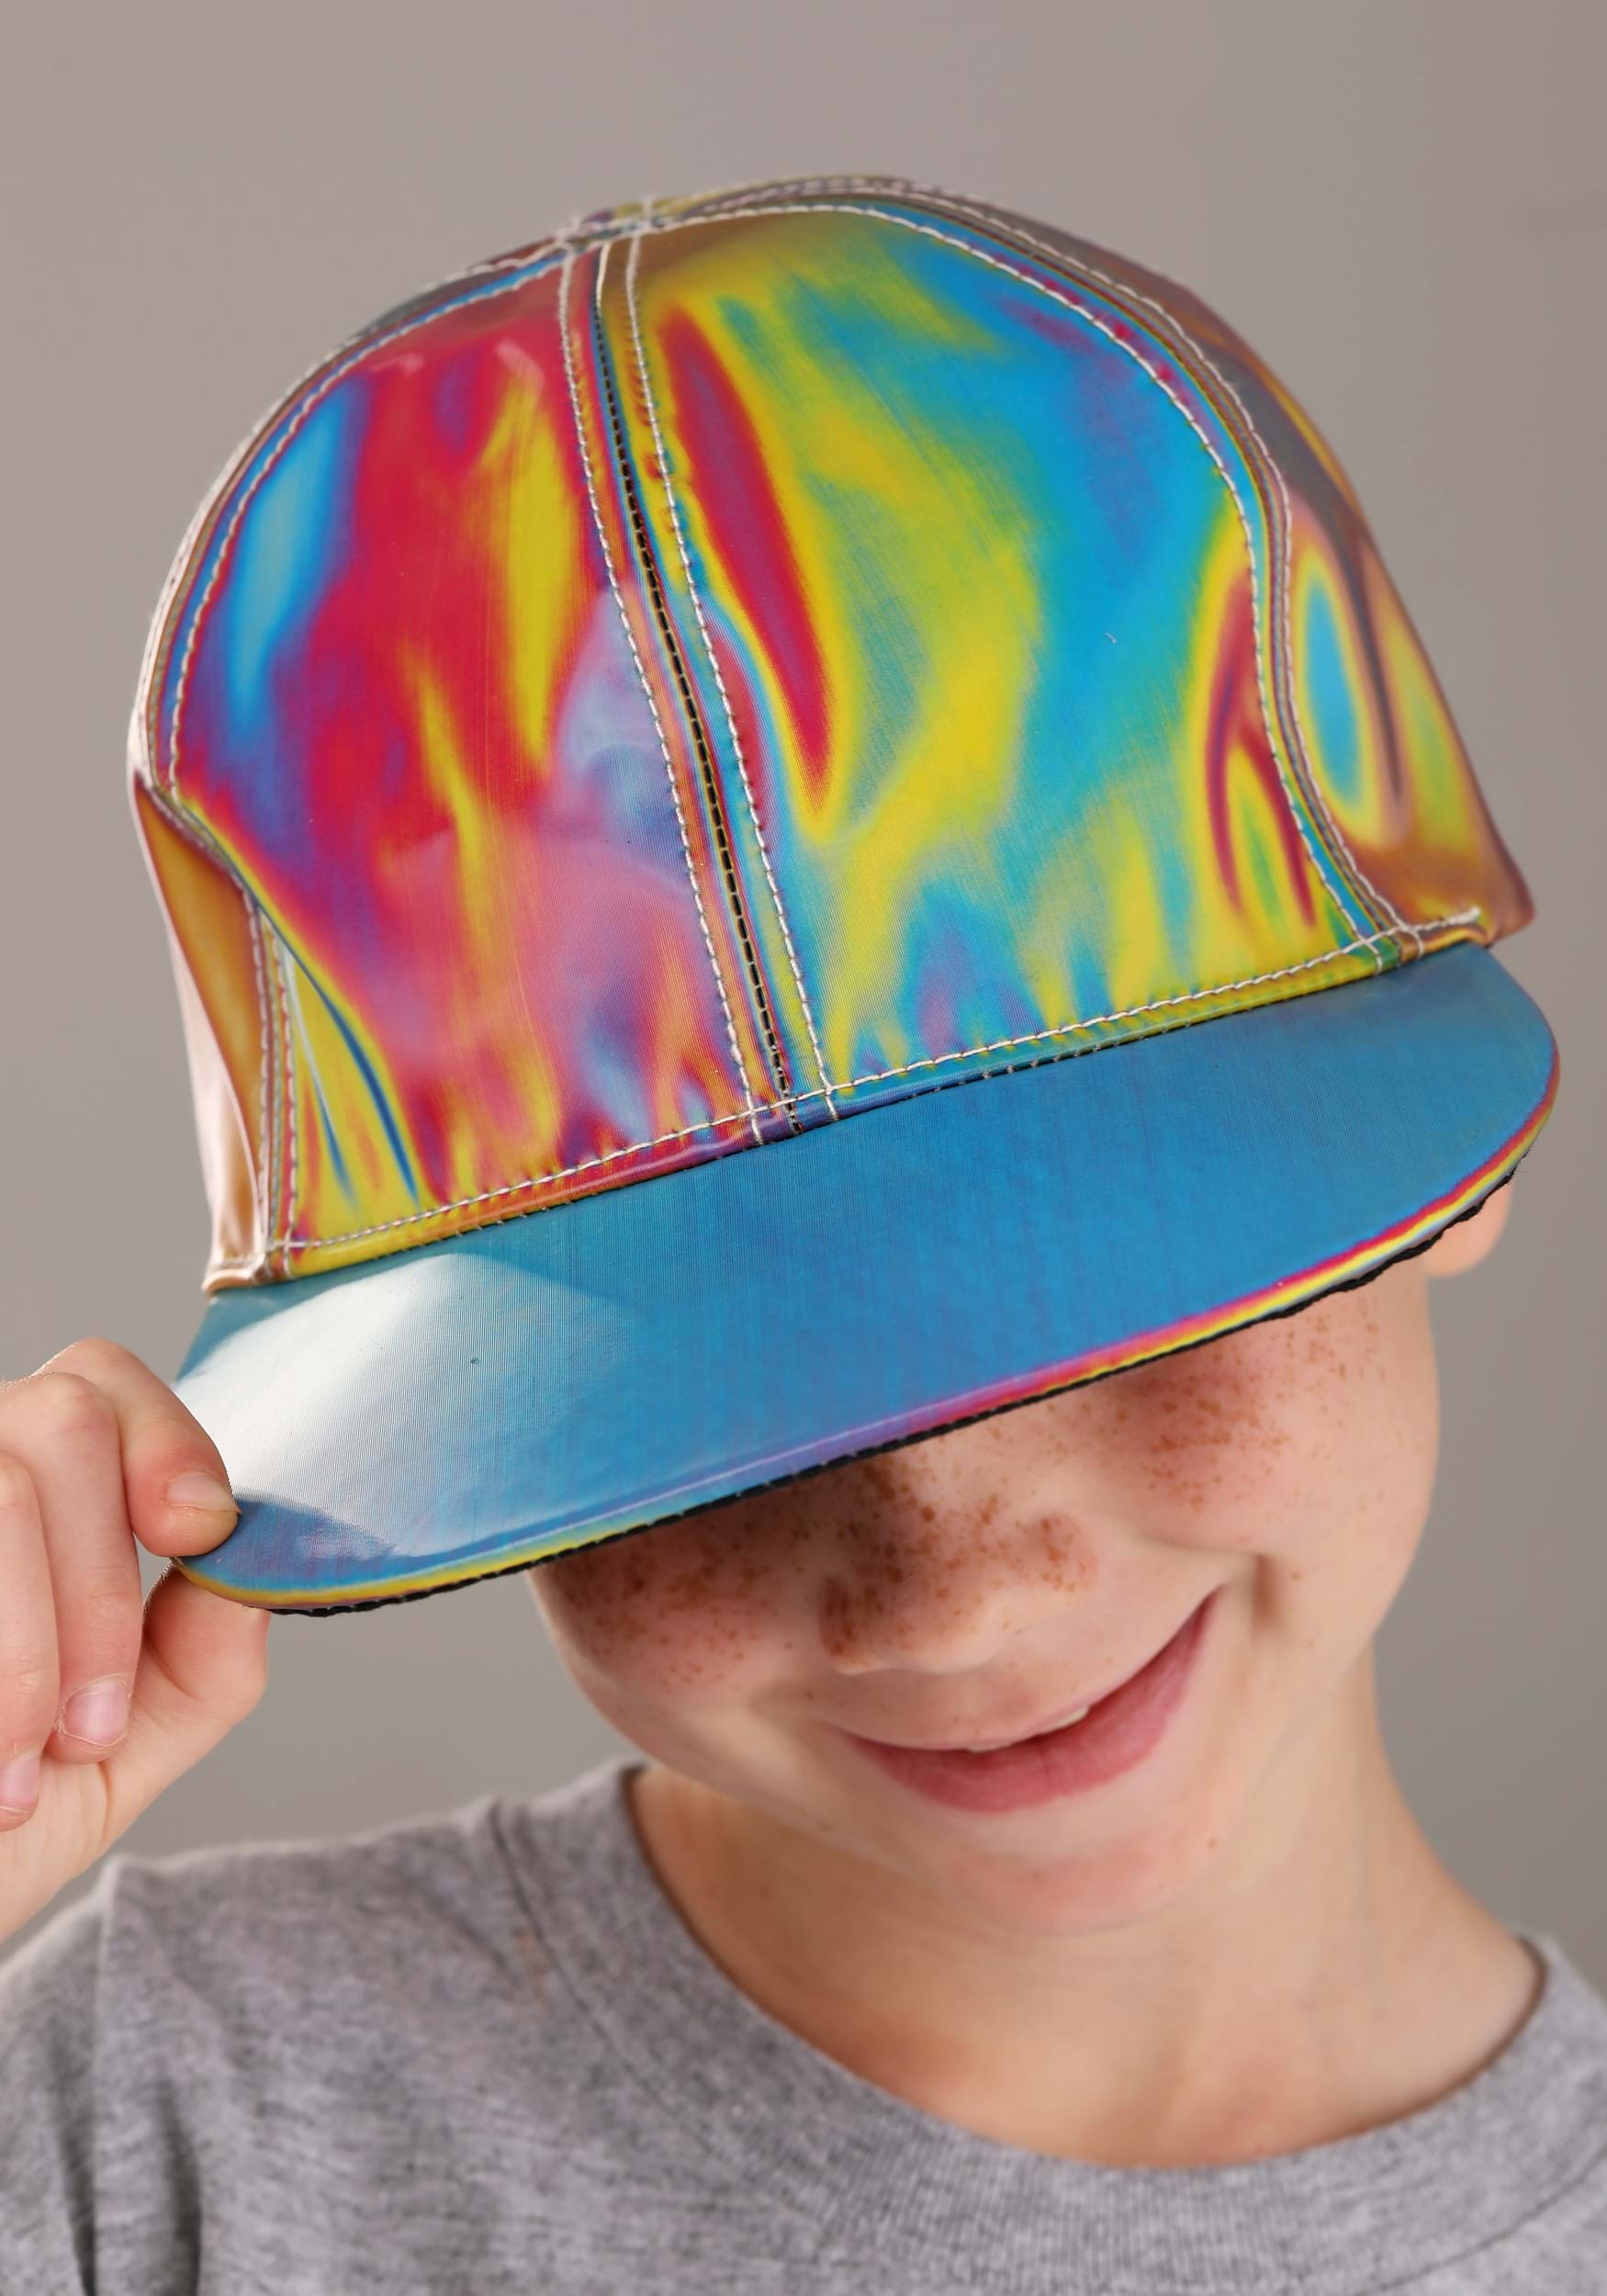 Back To The Future 2 Marty McFly Deluxe Costume Hat For Kids , Movie Accessories